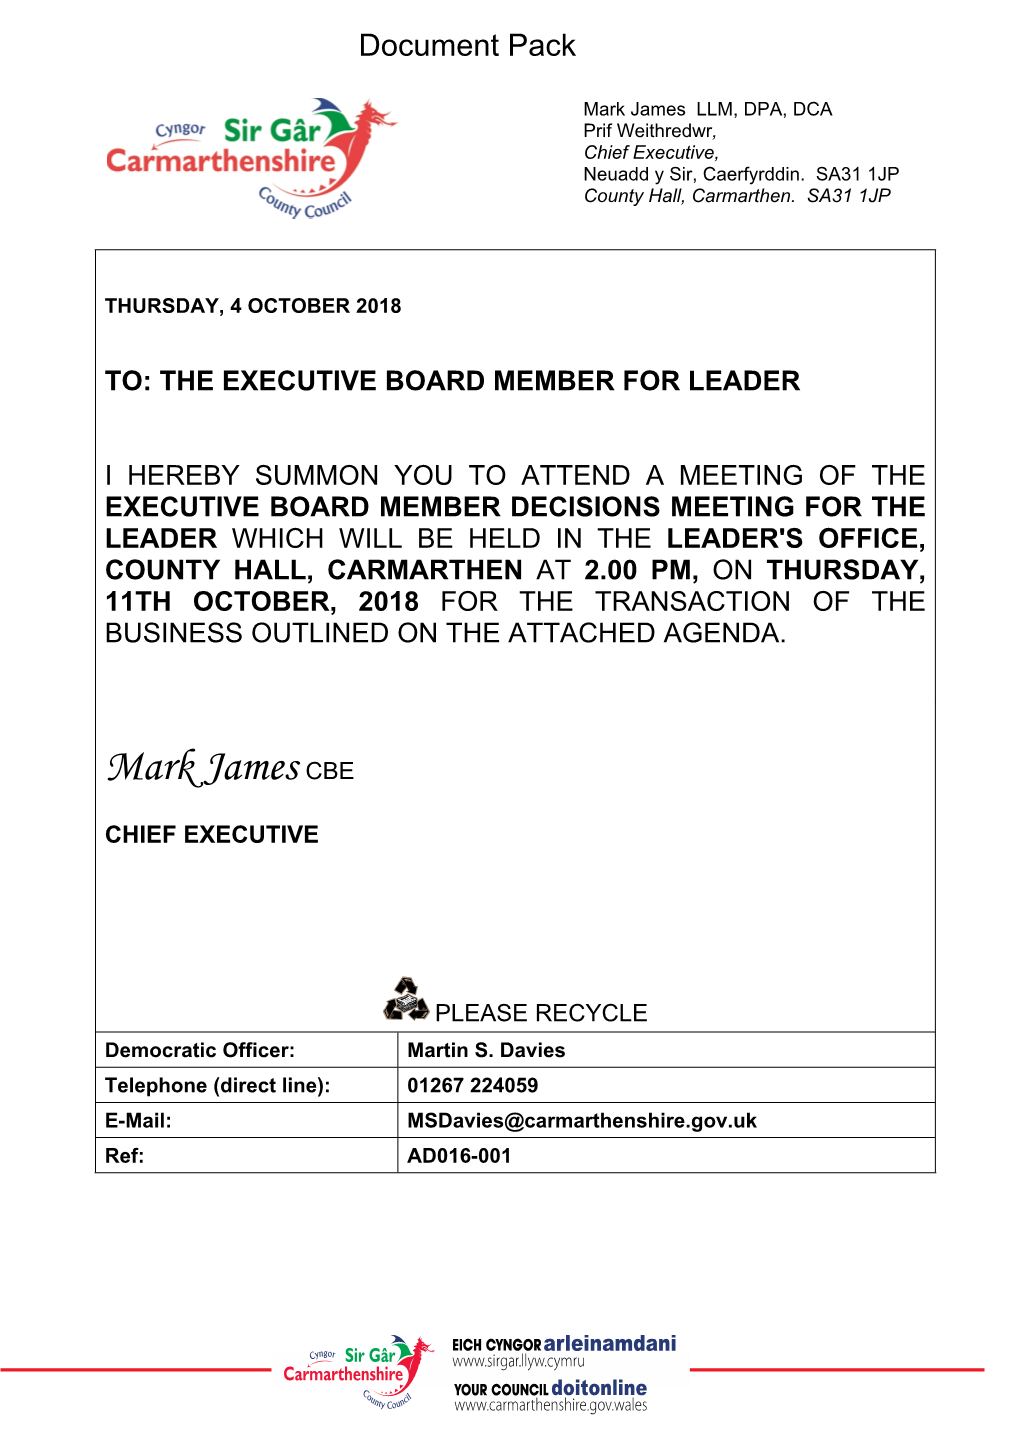 (Public Pack)Agenda Document for Executive Board Member Decisions